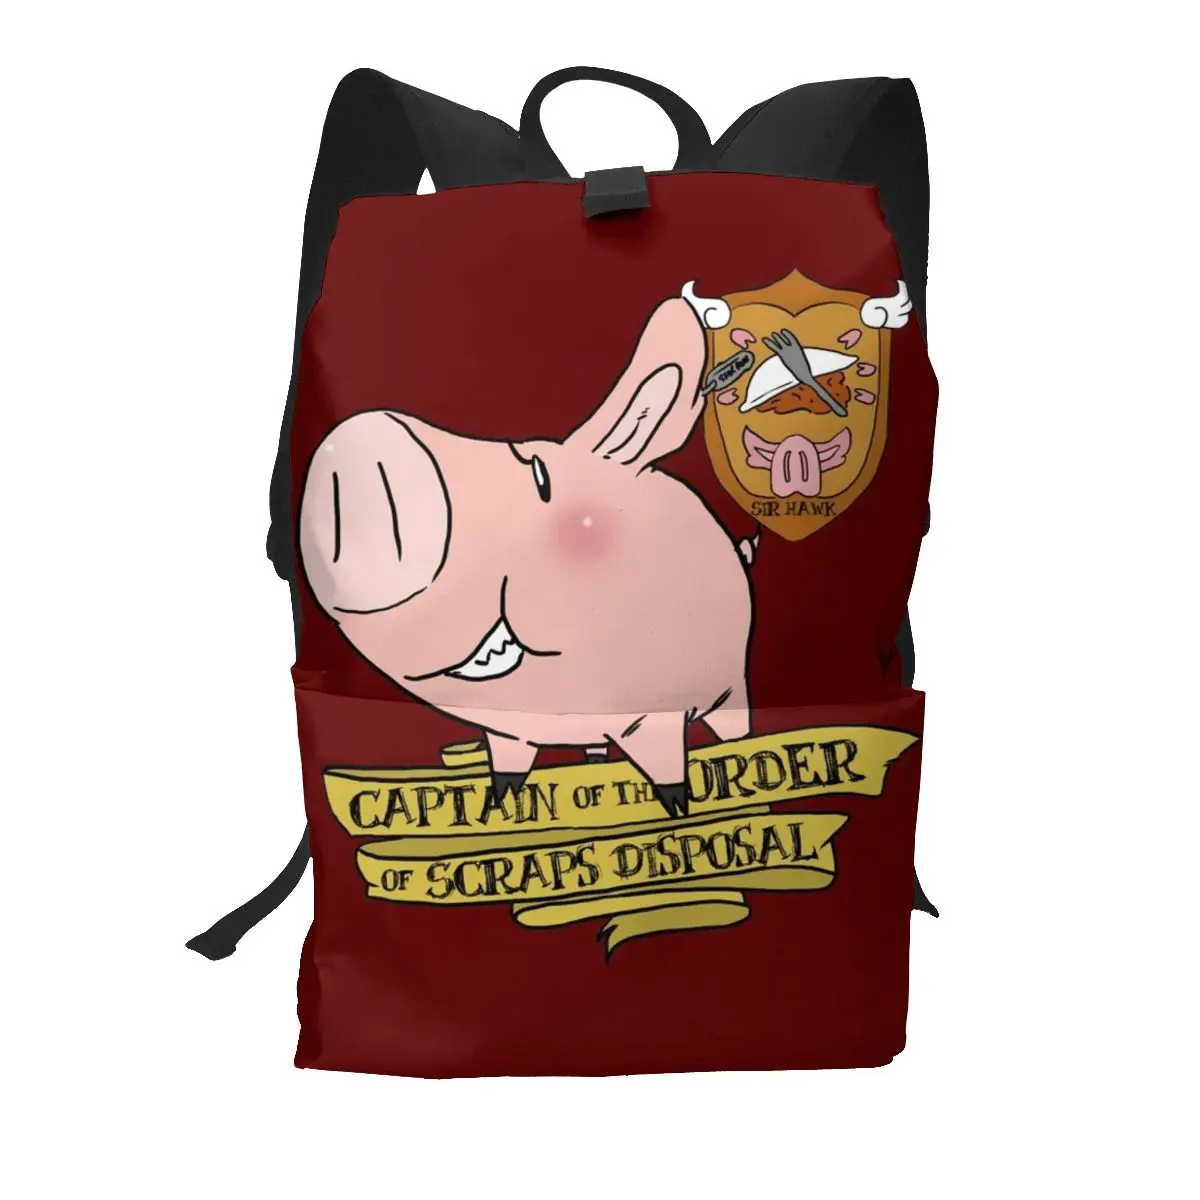 

Sir Hawk Captain Of Scraps Disposal 224 Backpacks Seven Deadly Sins Fitness Female Pattern Backpack Kawaii Polyester Bags